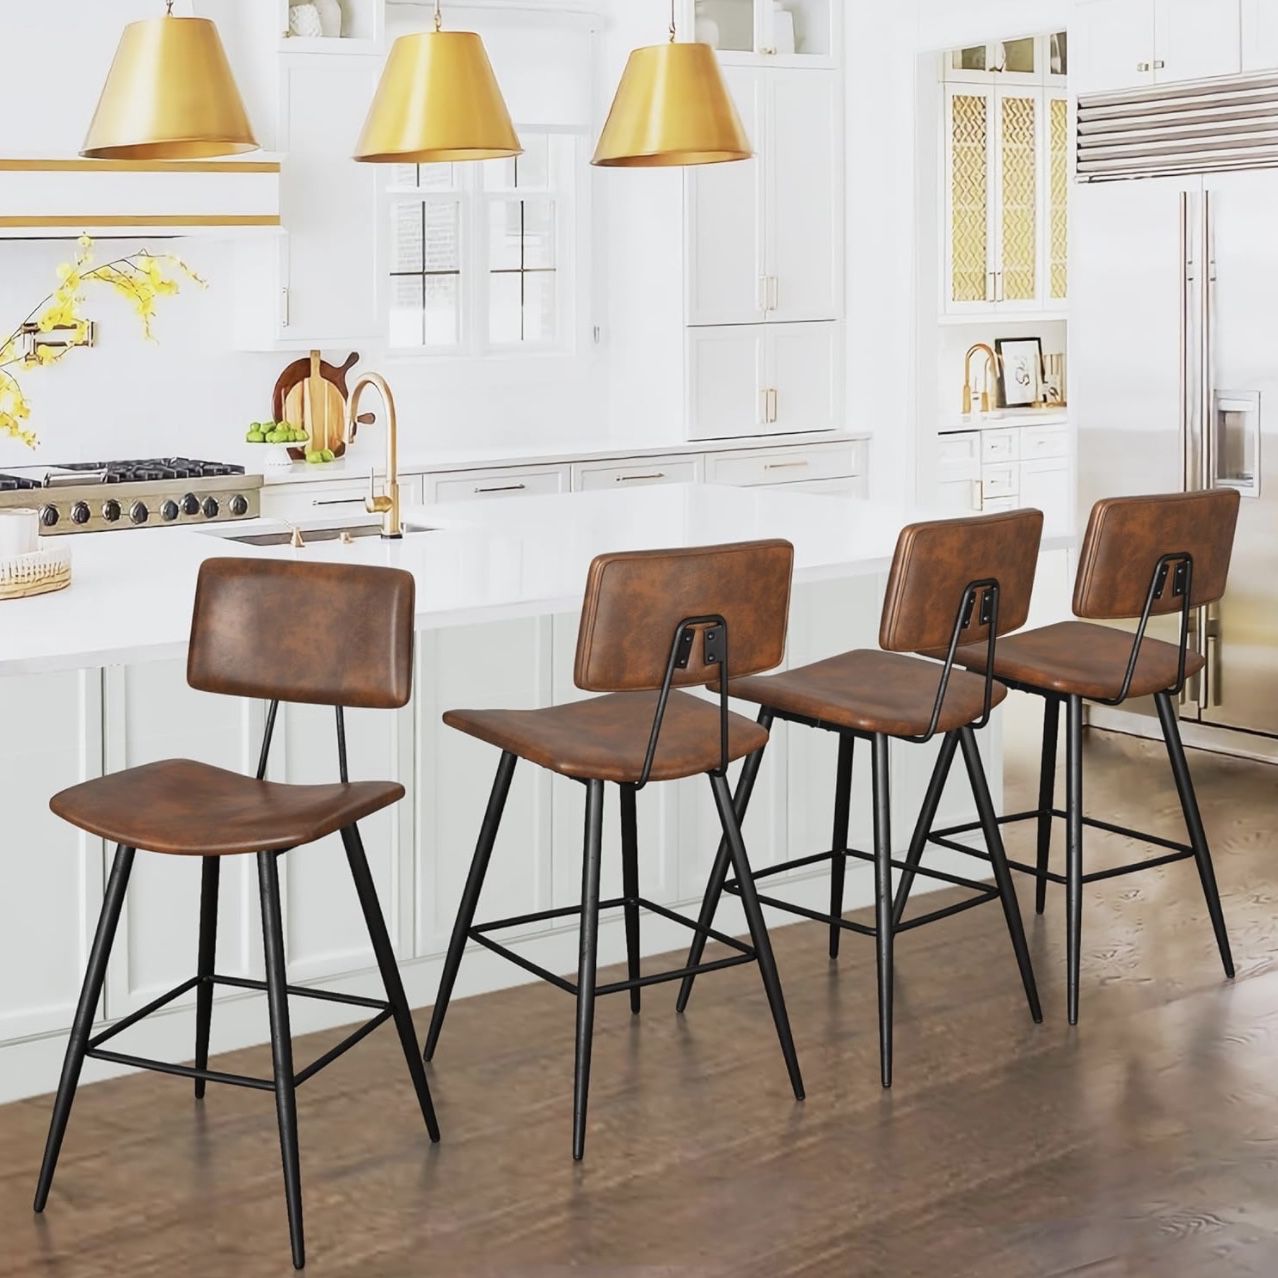 Red Brown Faux Leather Upholstered Barstools